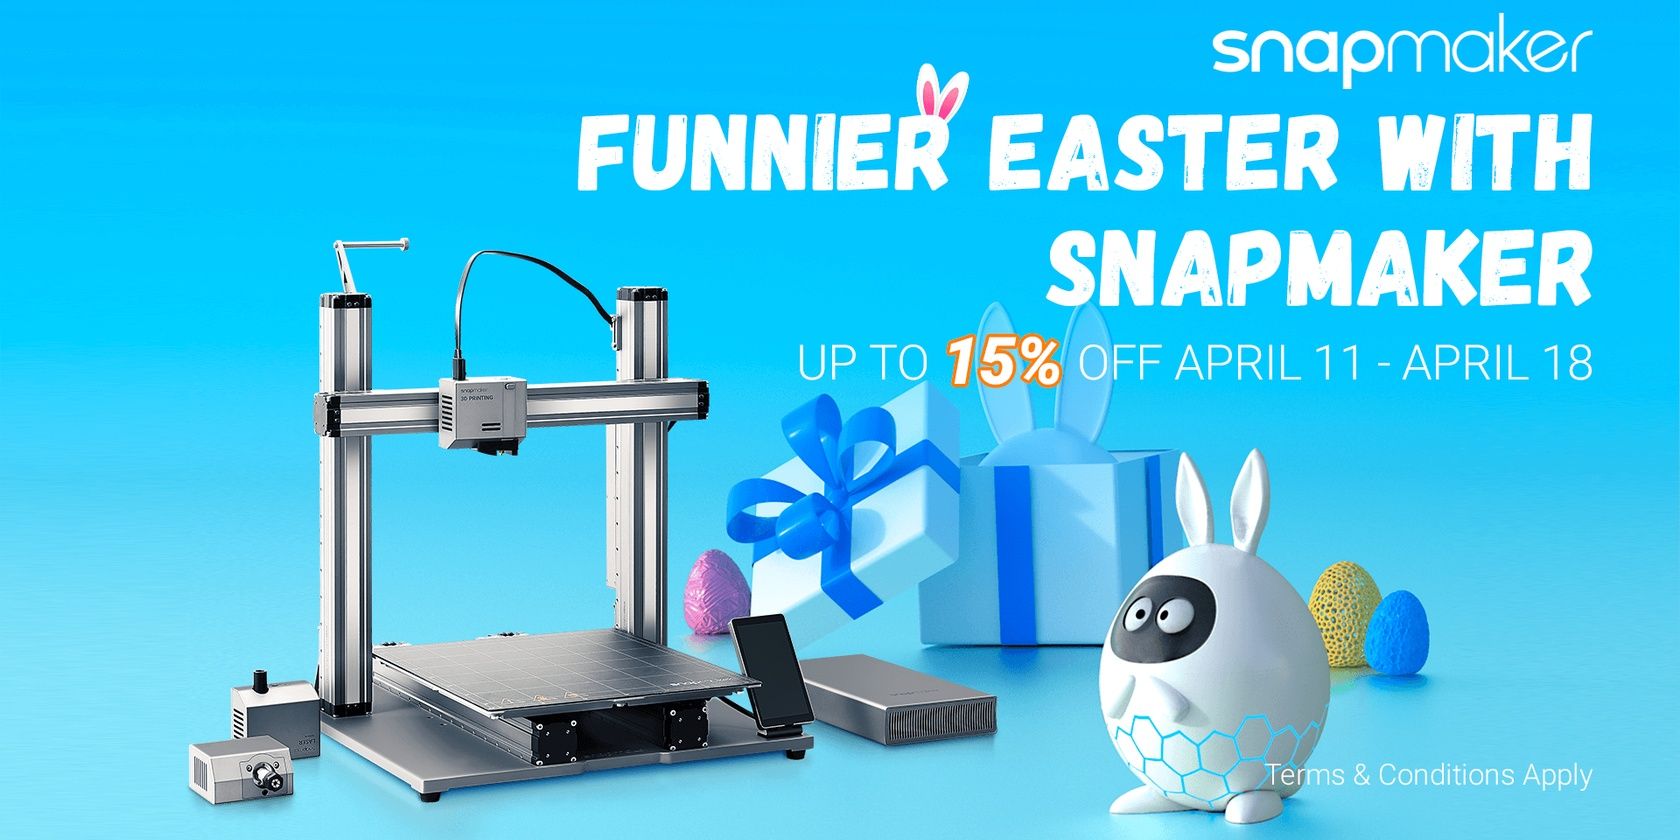 Snapmaker Easter sale